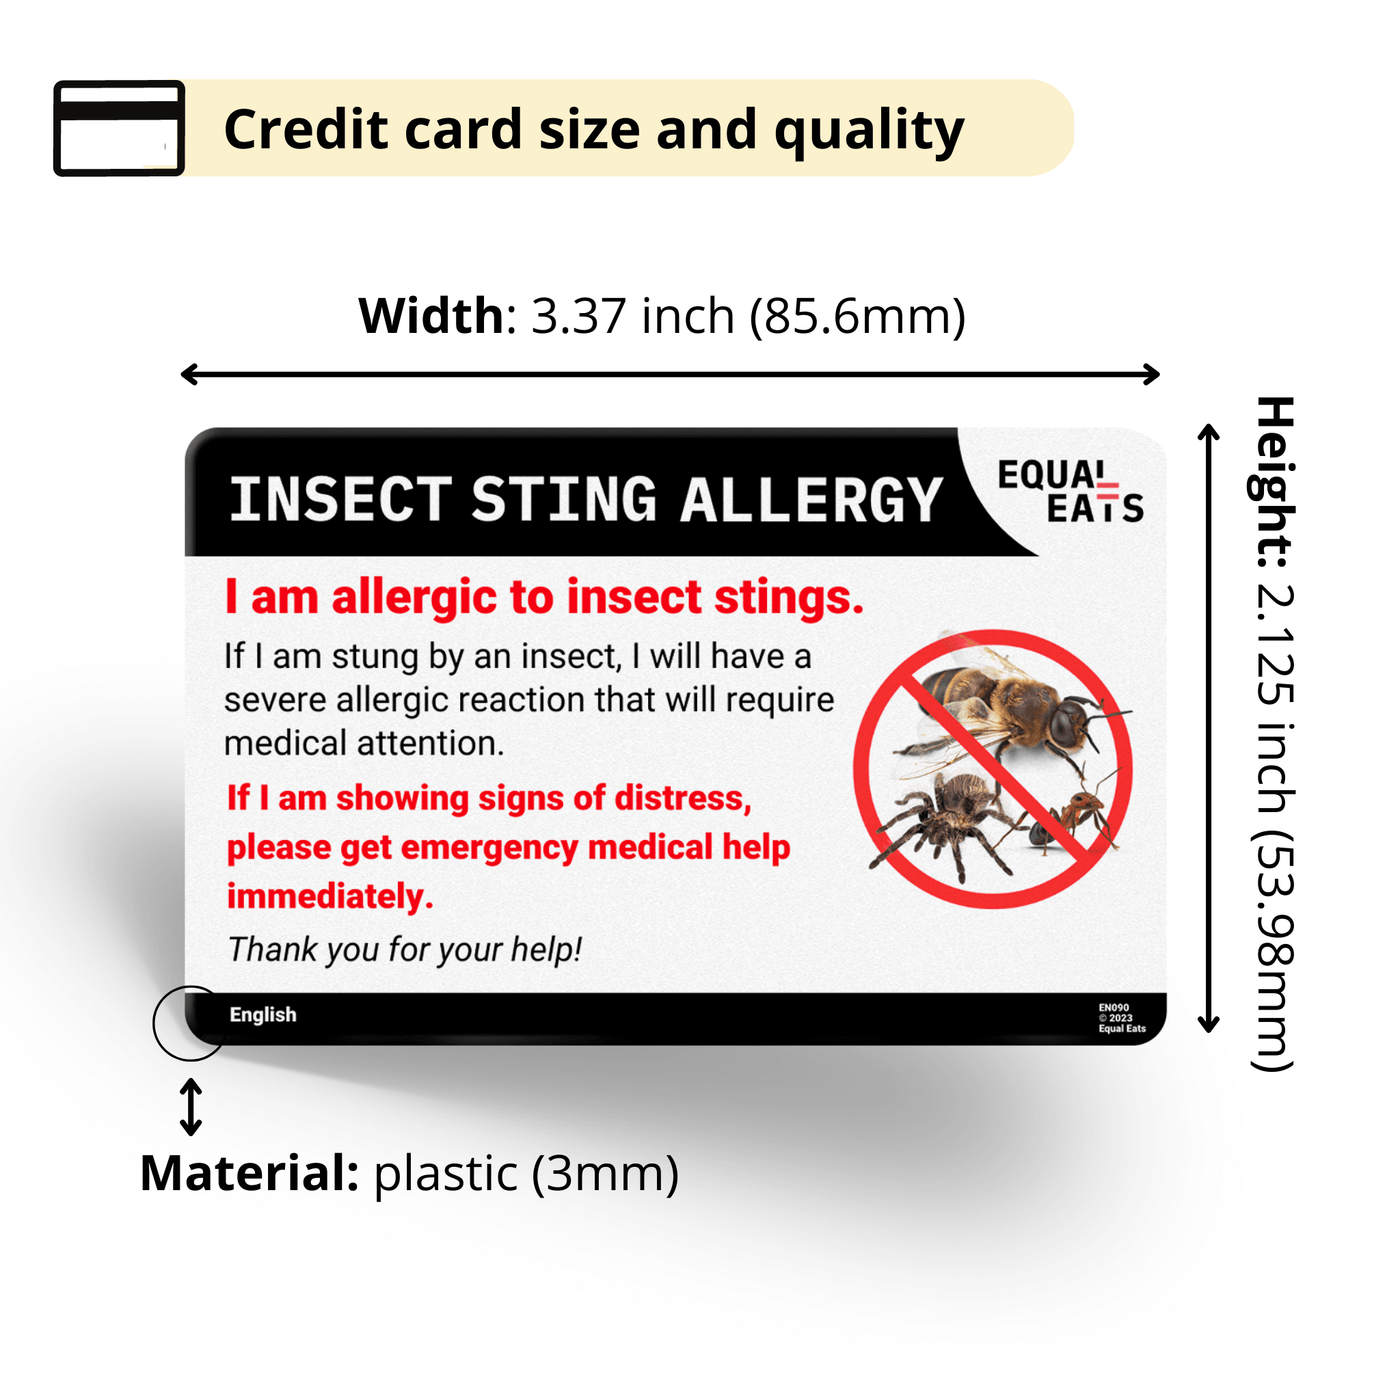 Swedish Insect Sting Allergy Card